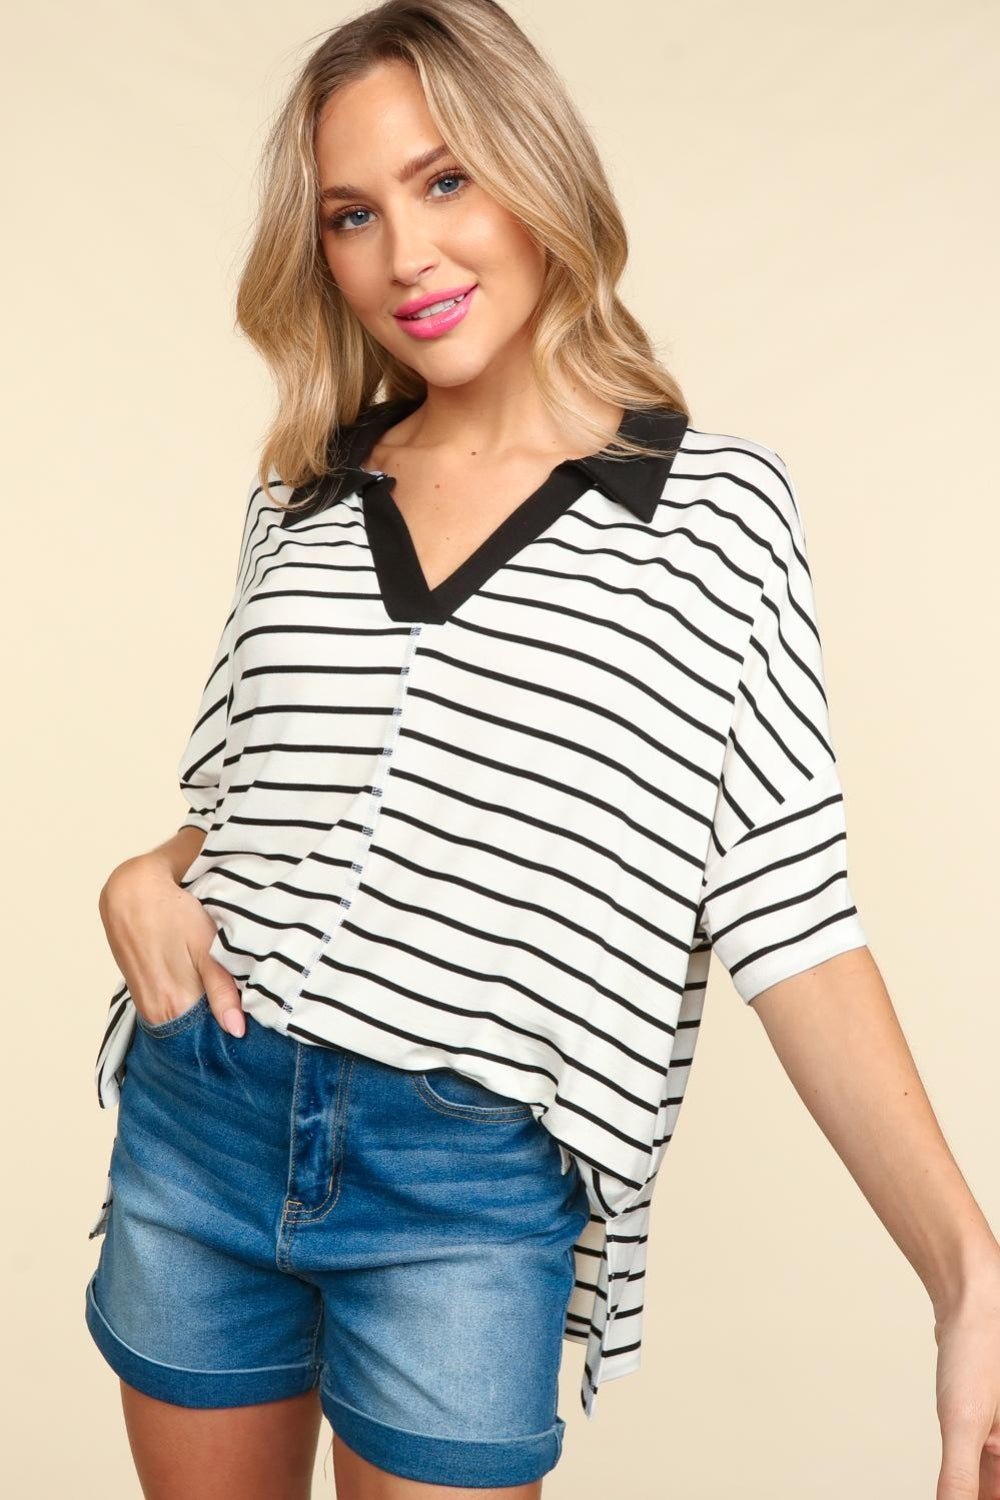 Striped Dropped Shoulder Half Sleeve T-Shirt in Off-White/BlackT-ShirtHaptics